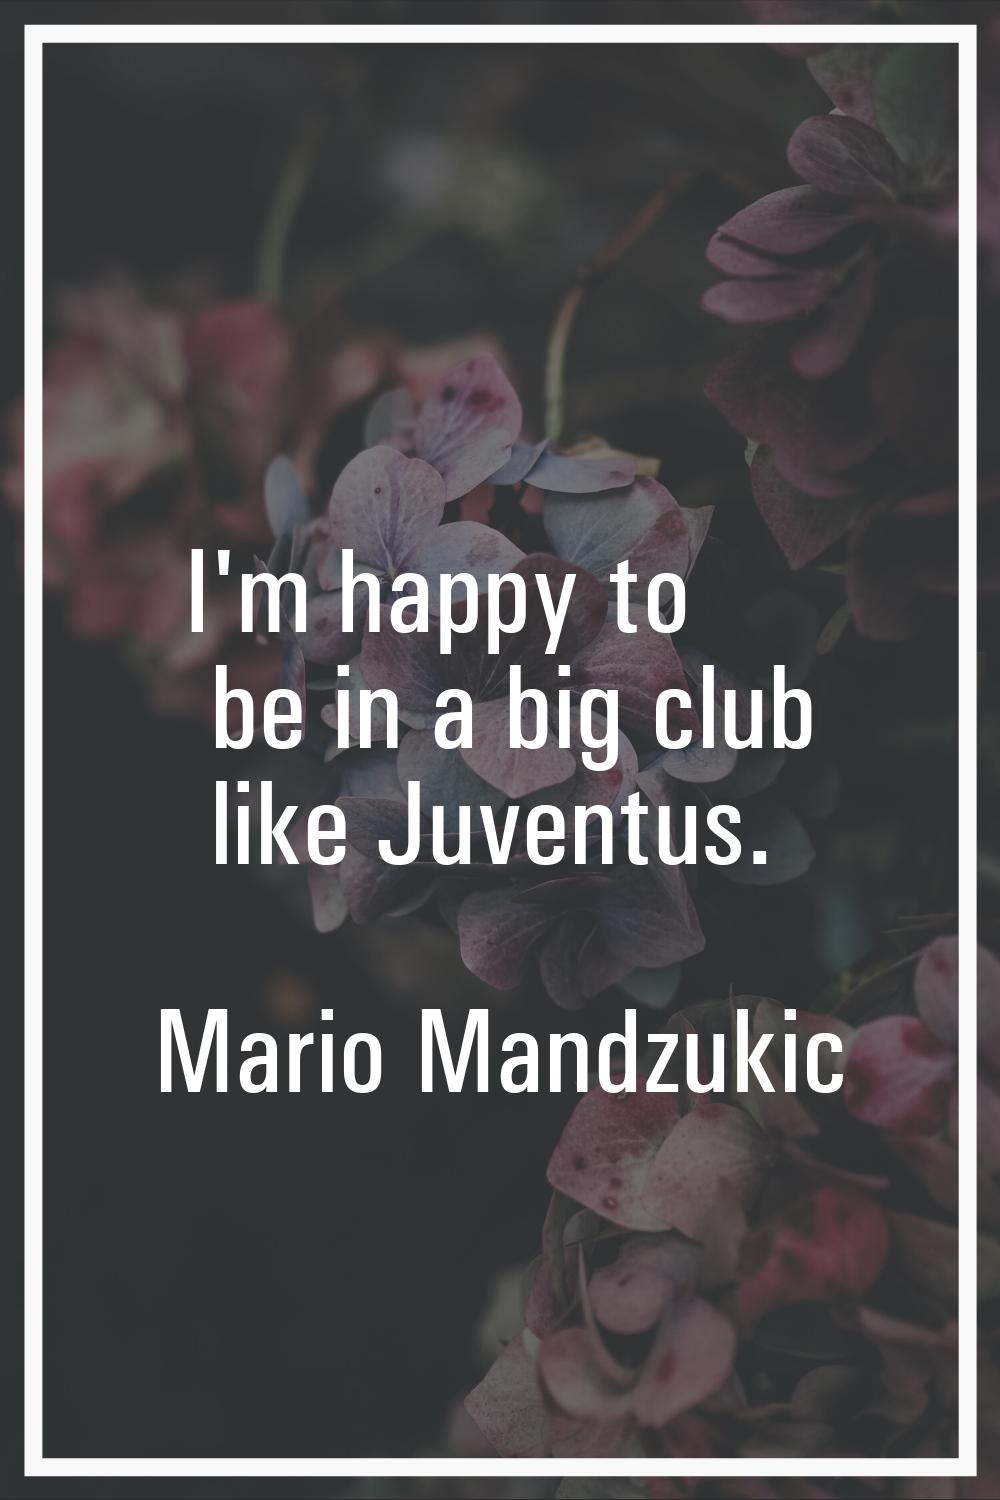 I'm happy to be in a big club like Juventus.